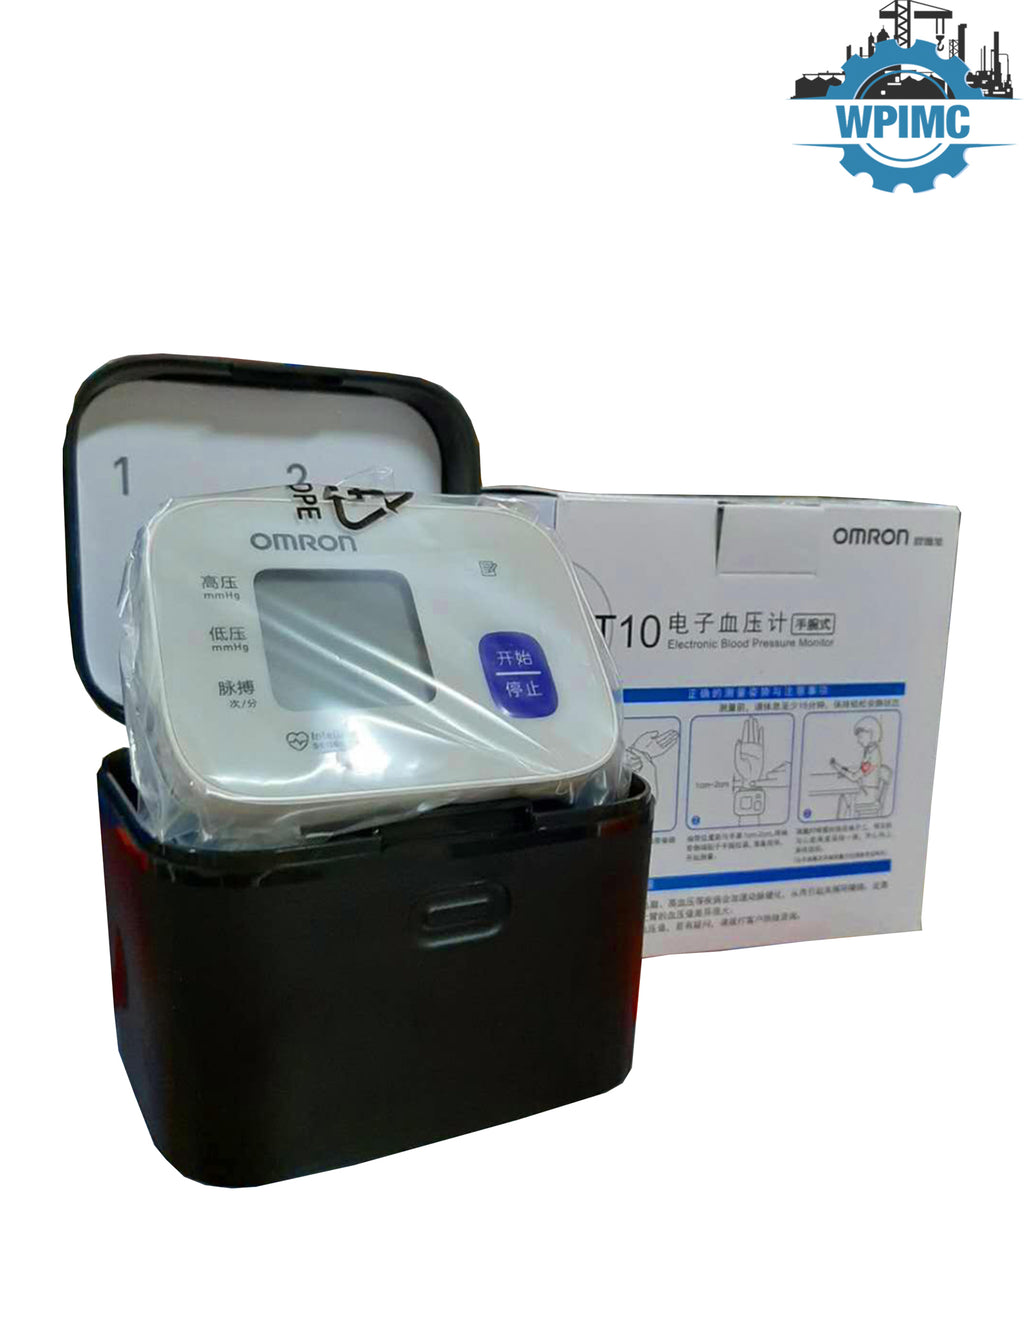 ELECTRONIC BLOOD PRESSURE MONITOR OMRON T10